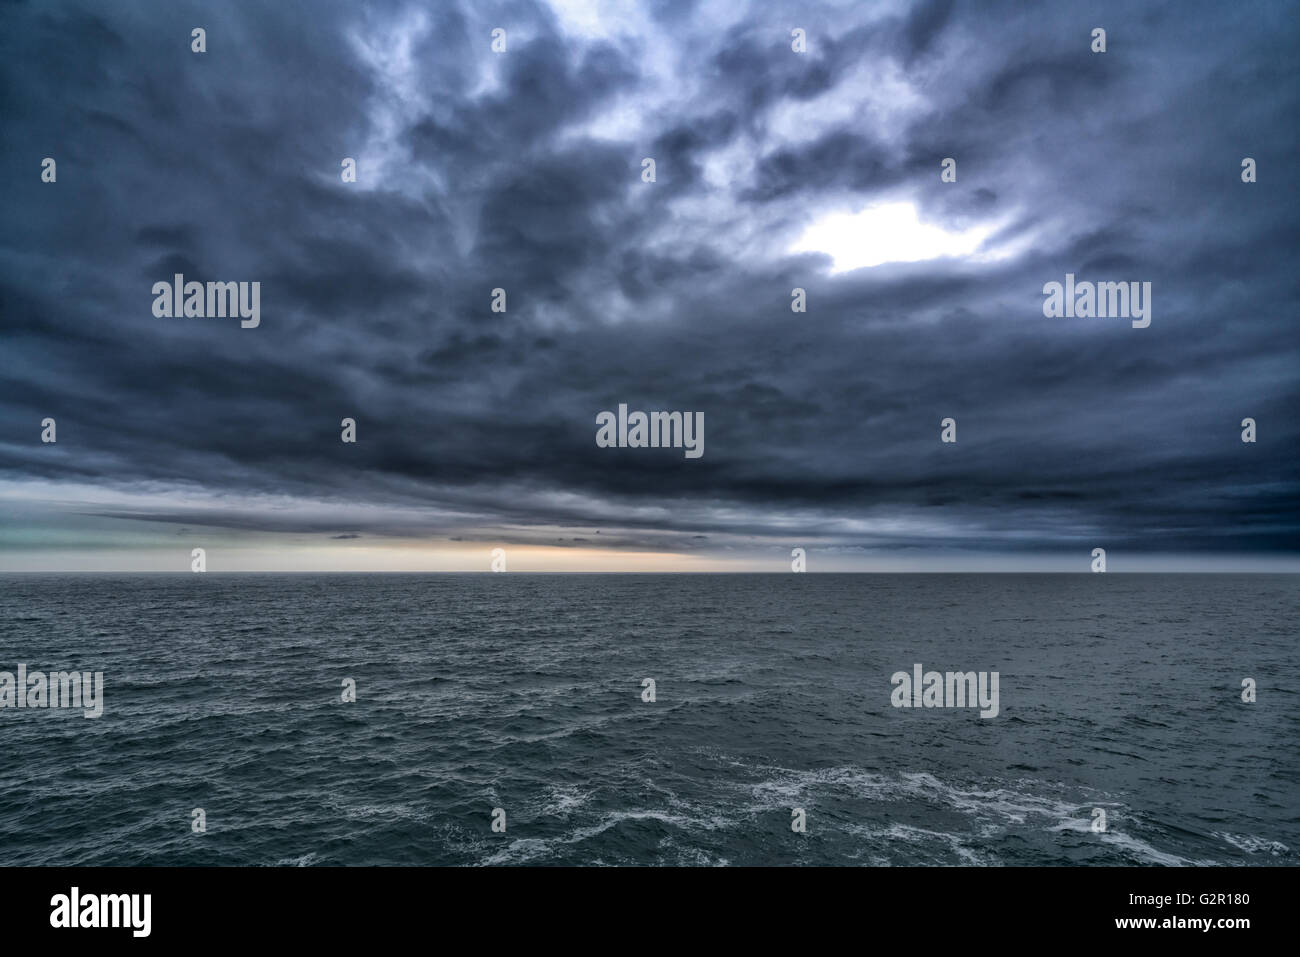 Dark stormy cloud above the sea, dark tone nature abstract Stock Photo